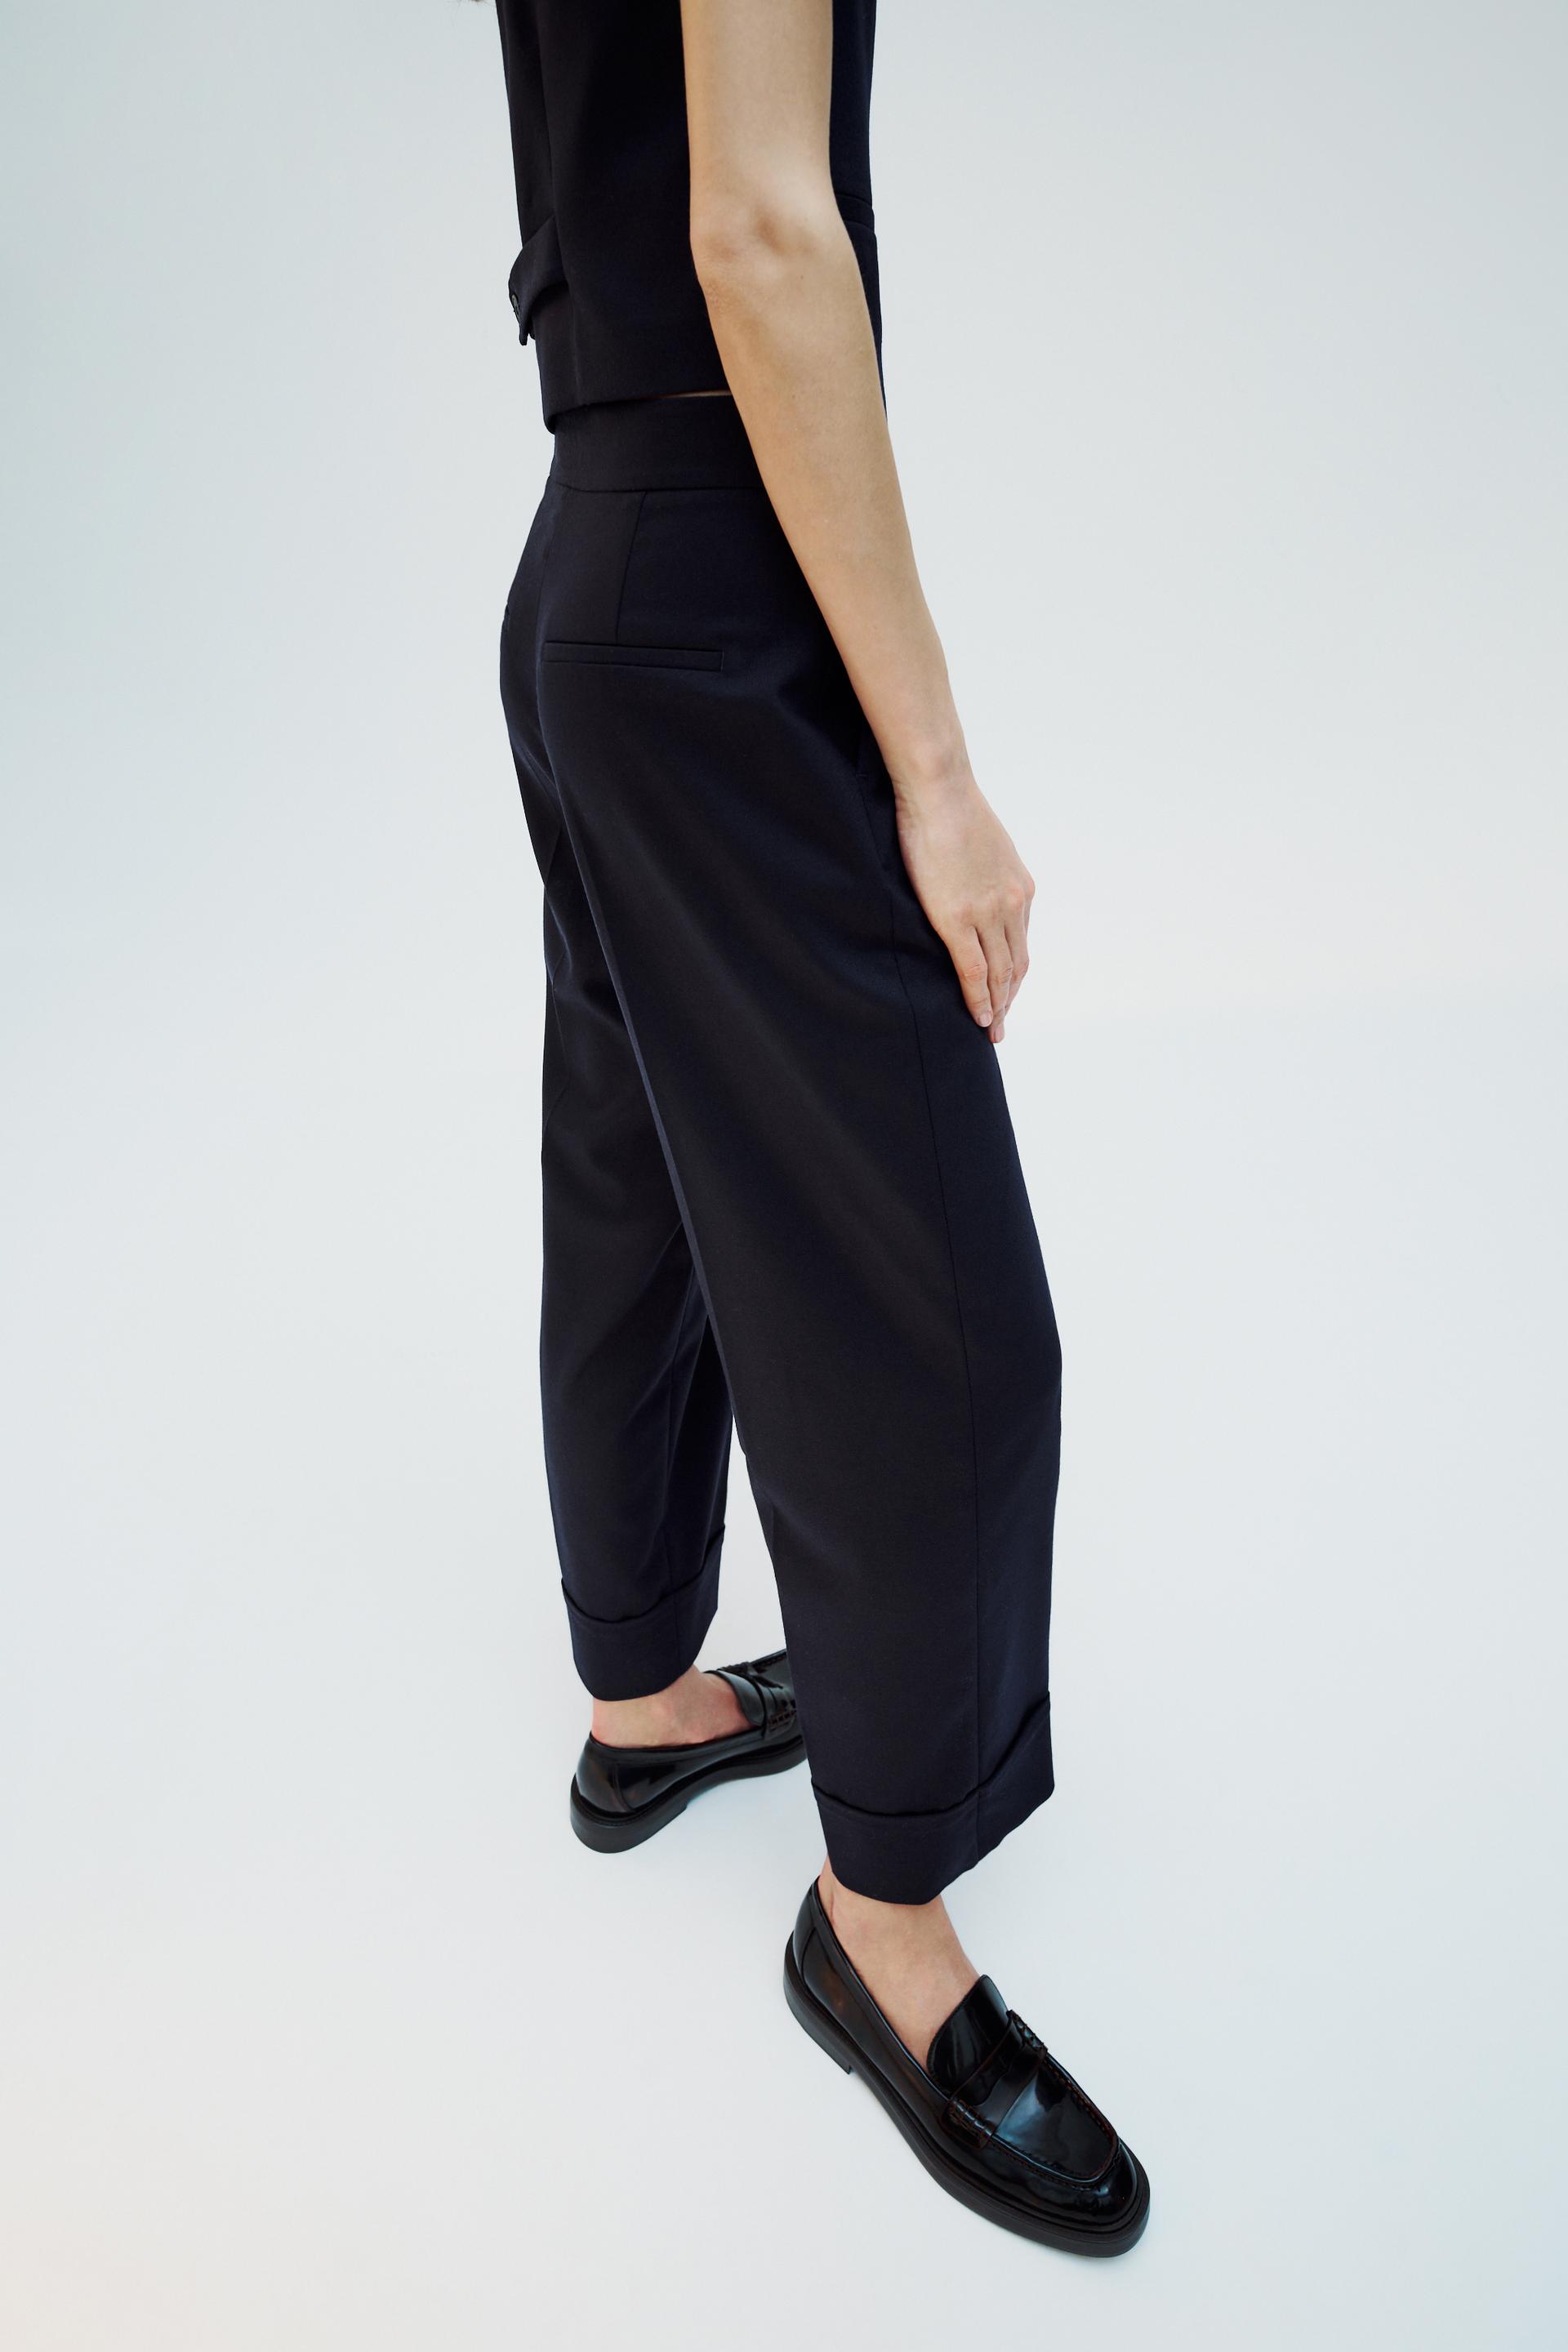 Zara Pants With Turned-Up Hem  Cotton casual pants, Summer fashion trends,  Pants for women